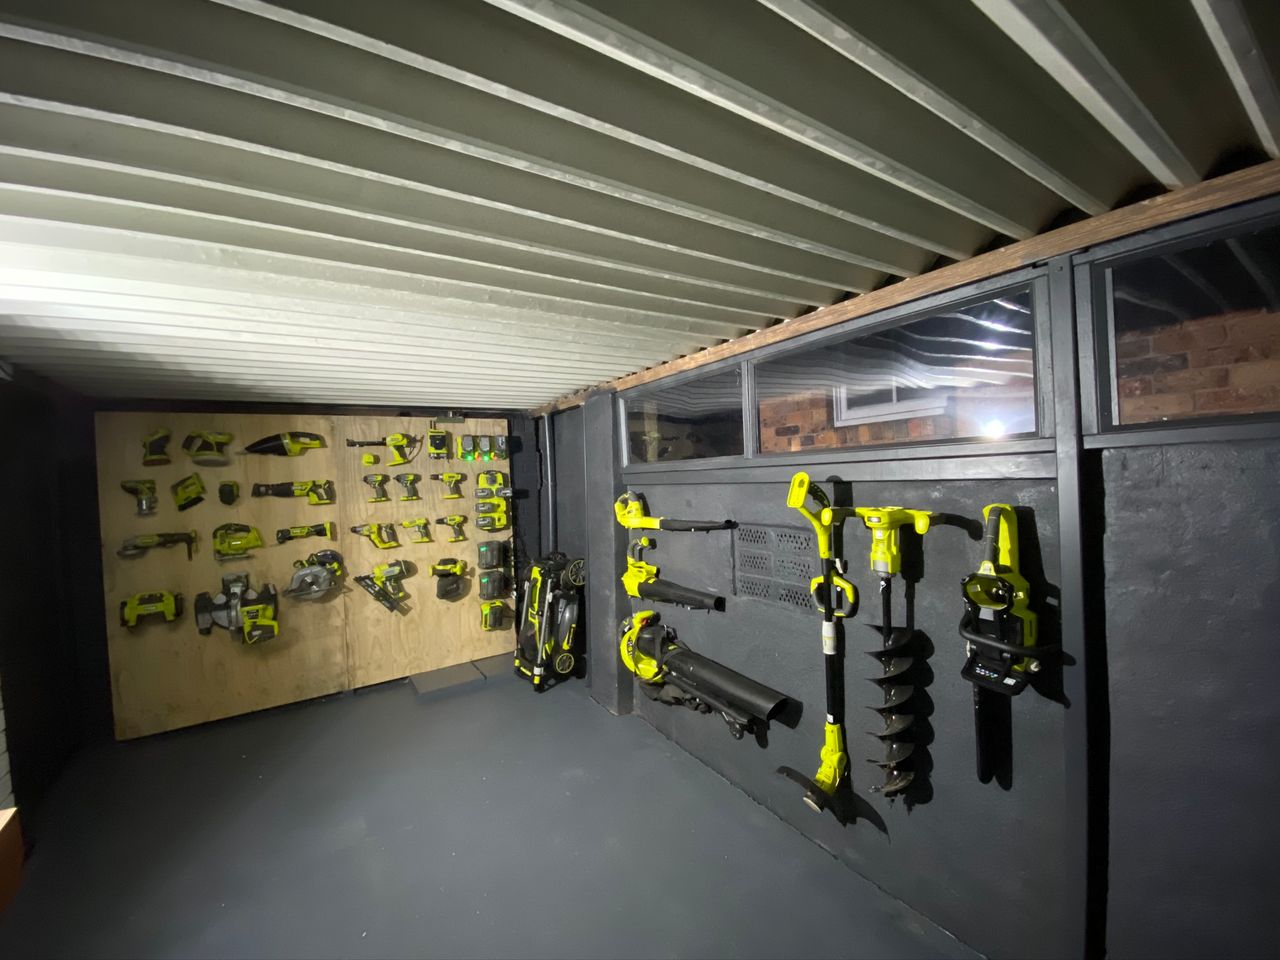 Tool Shed organisation. Created windows in boat port to seal it in and built plywood display wall for power tools.